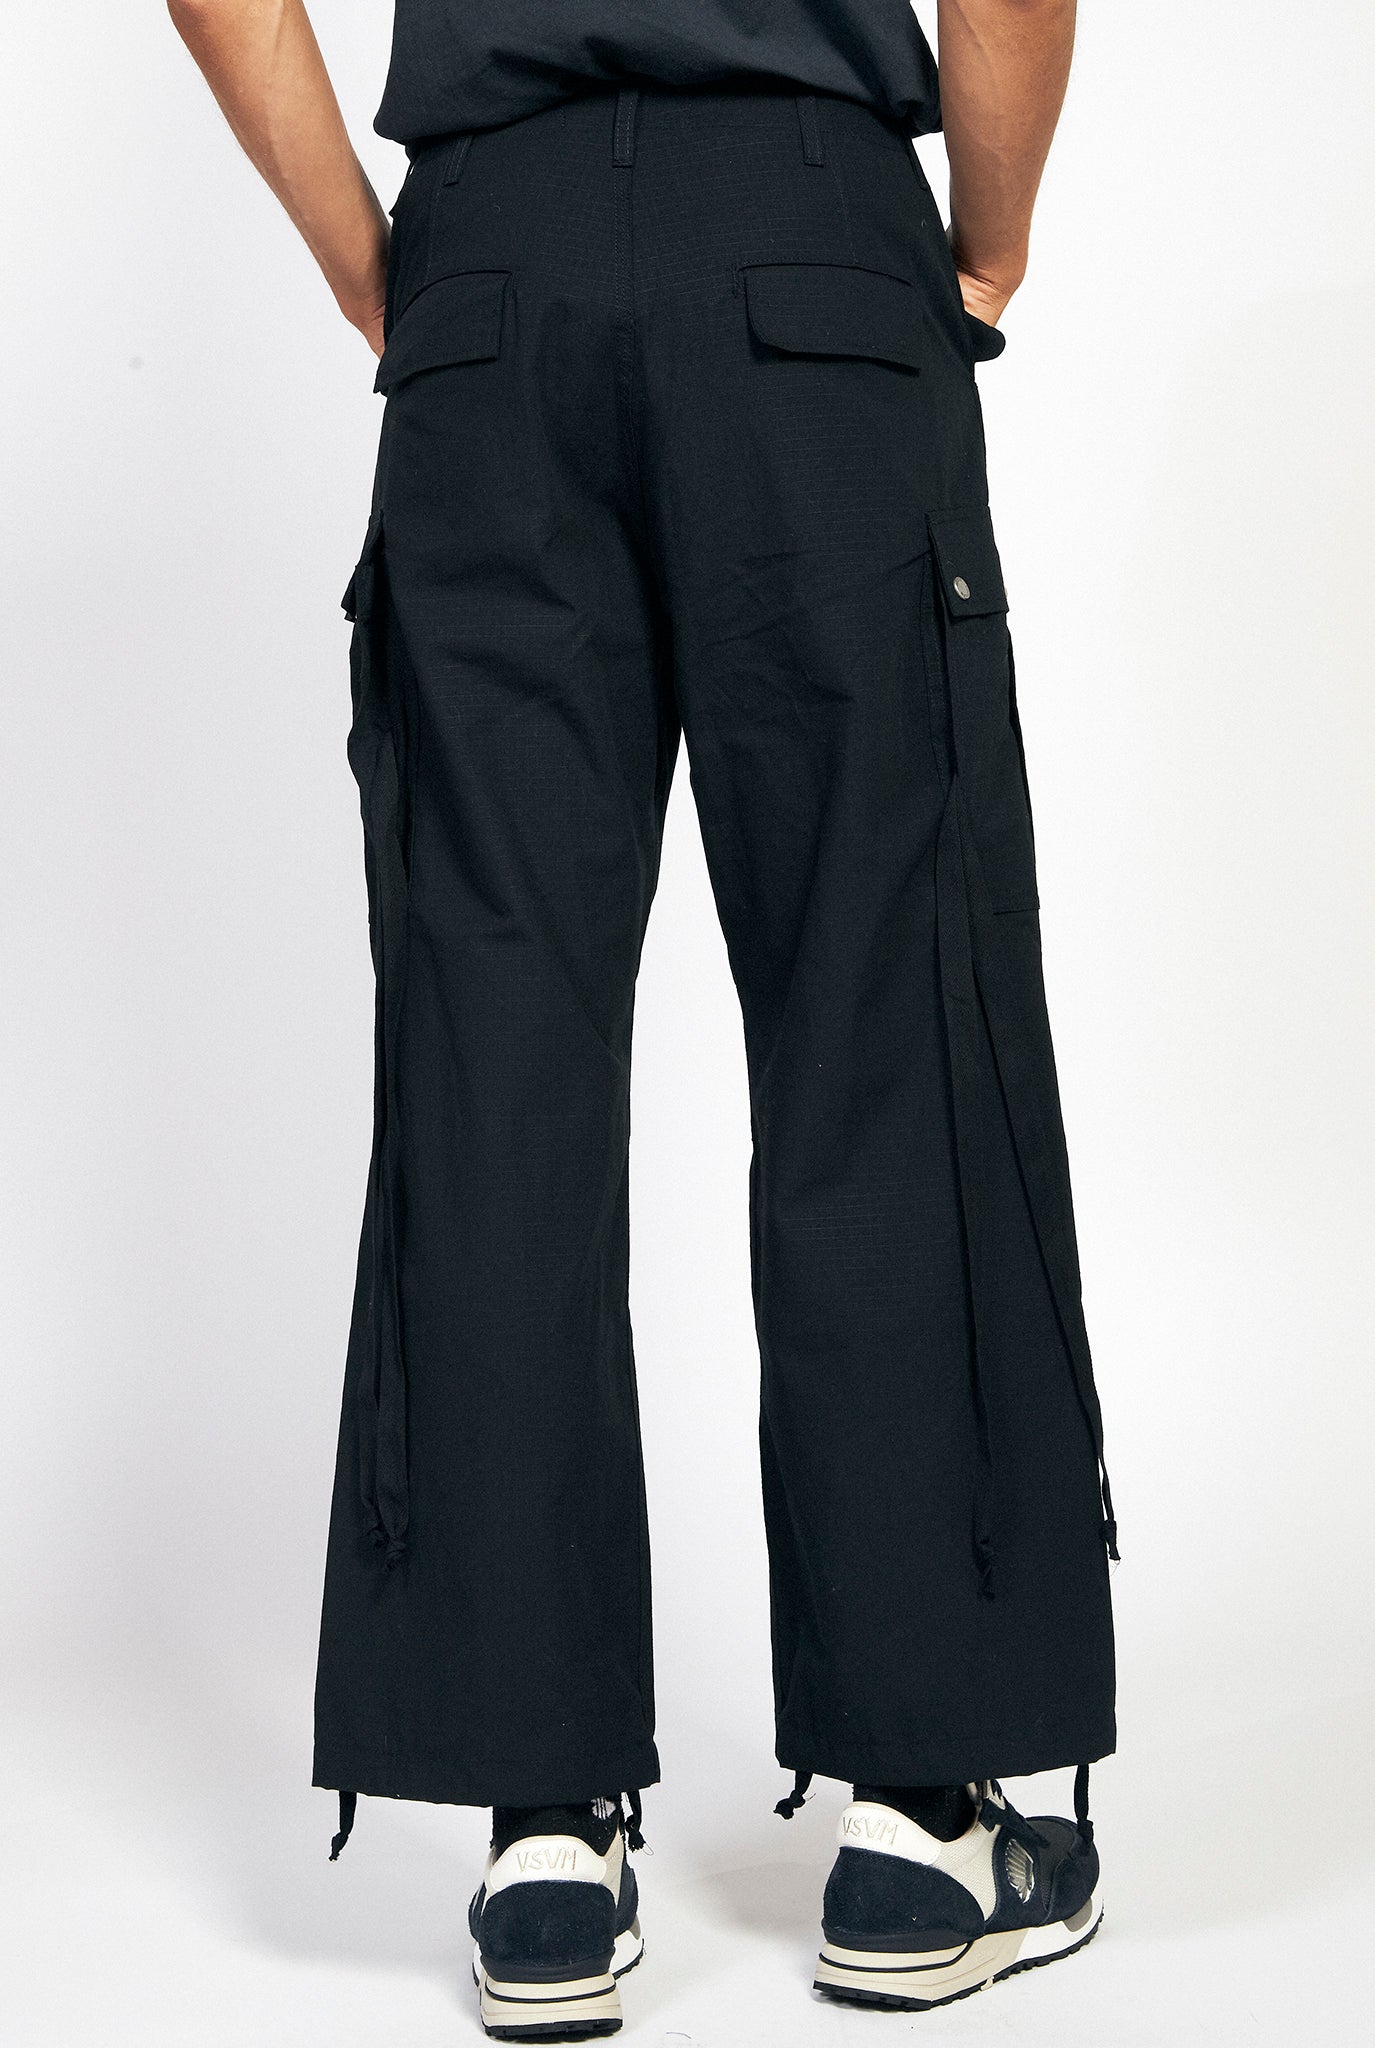 REESE COOPER Ripstop Cargo Pant